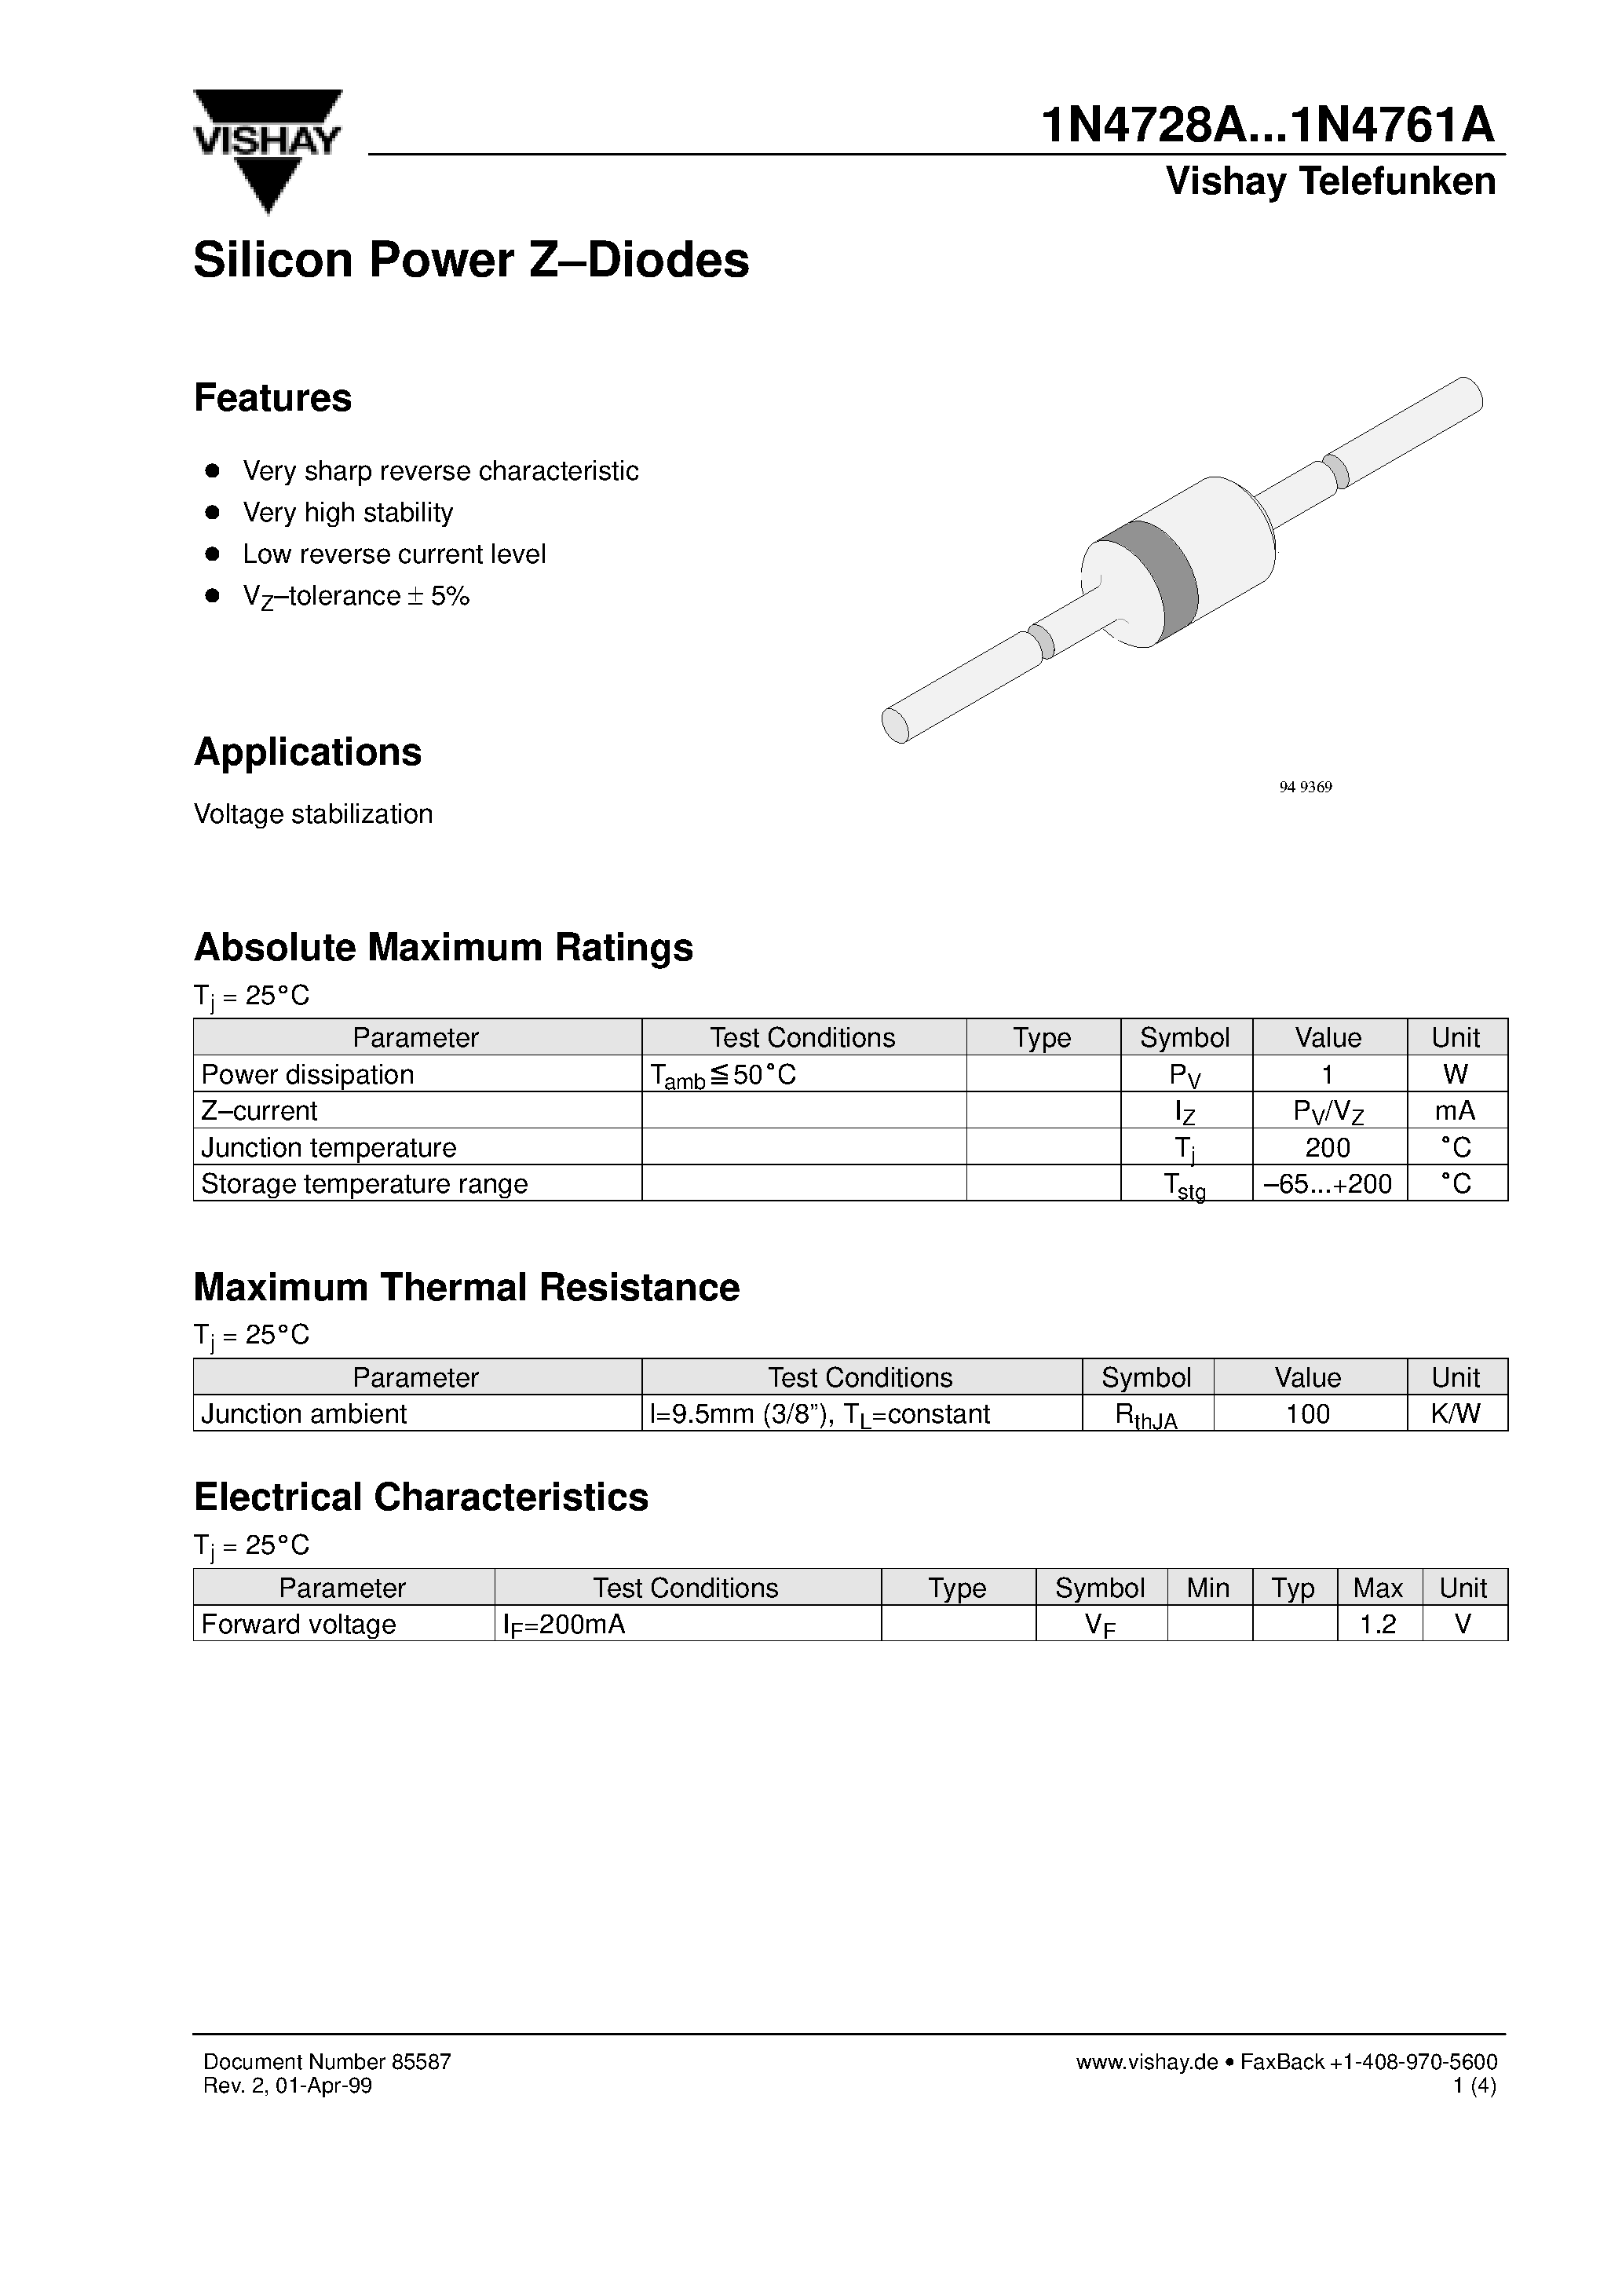 Datasheet 1N4728A - Silicon Power Z-Diodes page 1